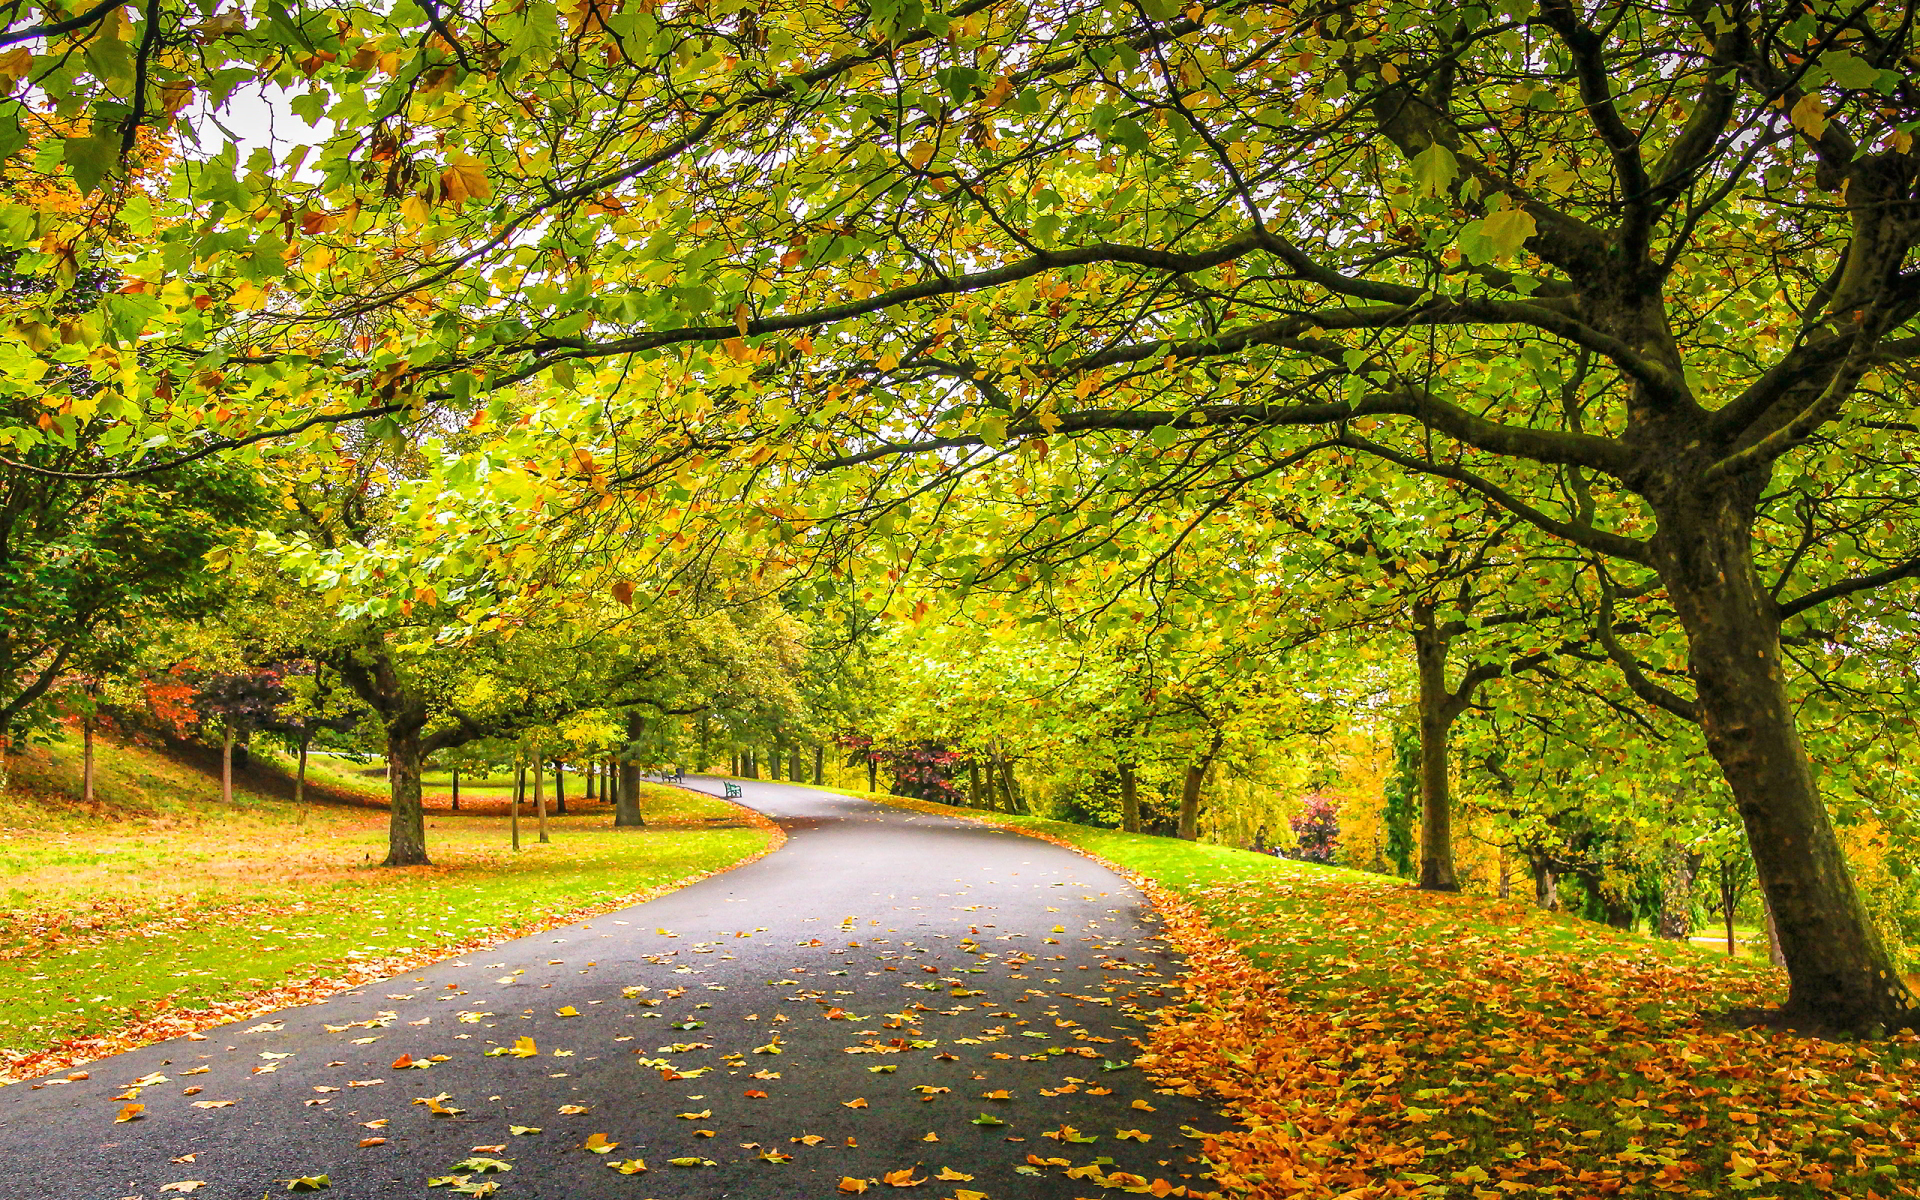 Sofia Rasmussen Bright, The Road In The Park - Road And Park - HD Wallpaper 